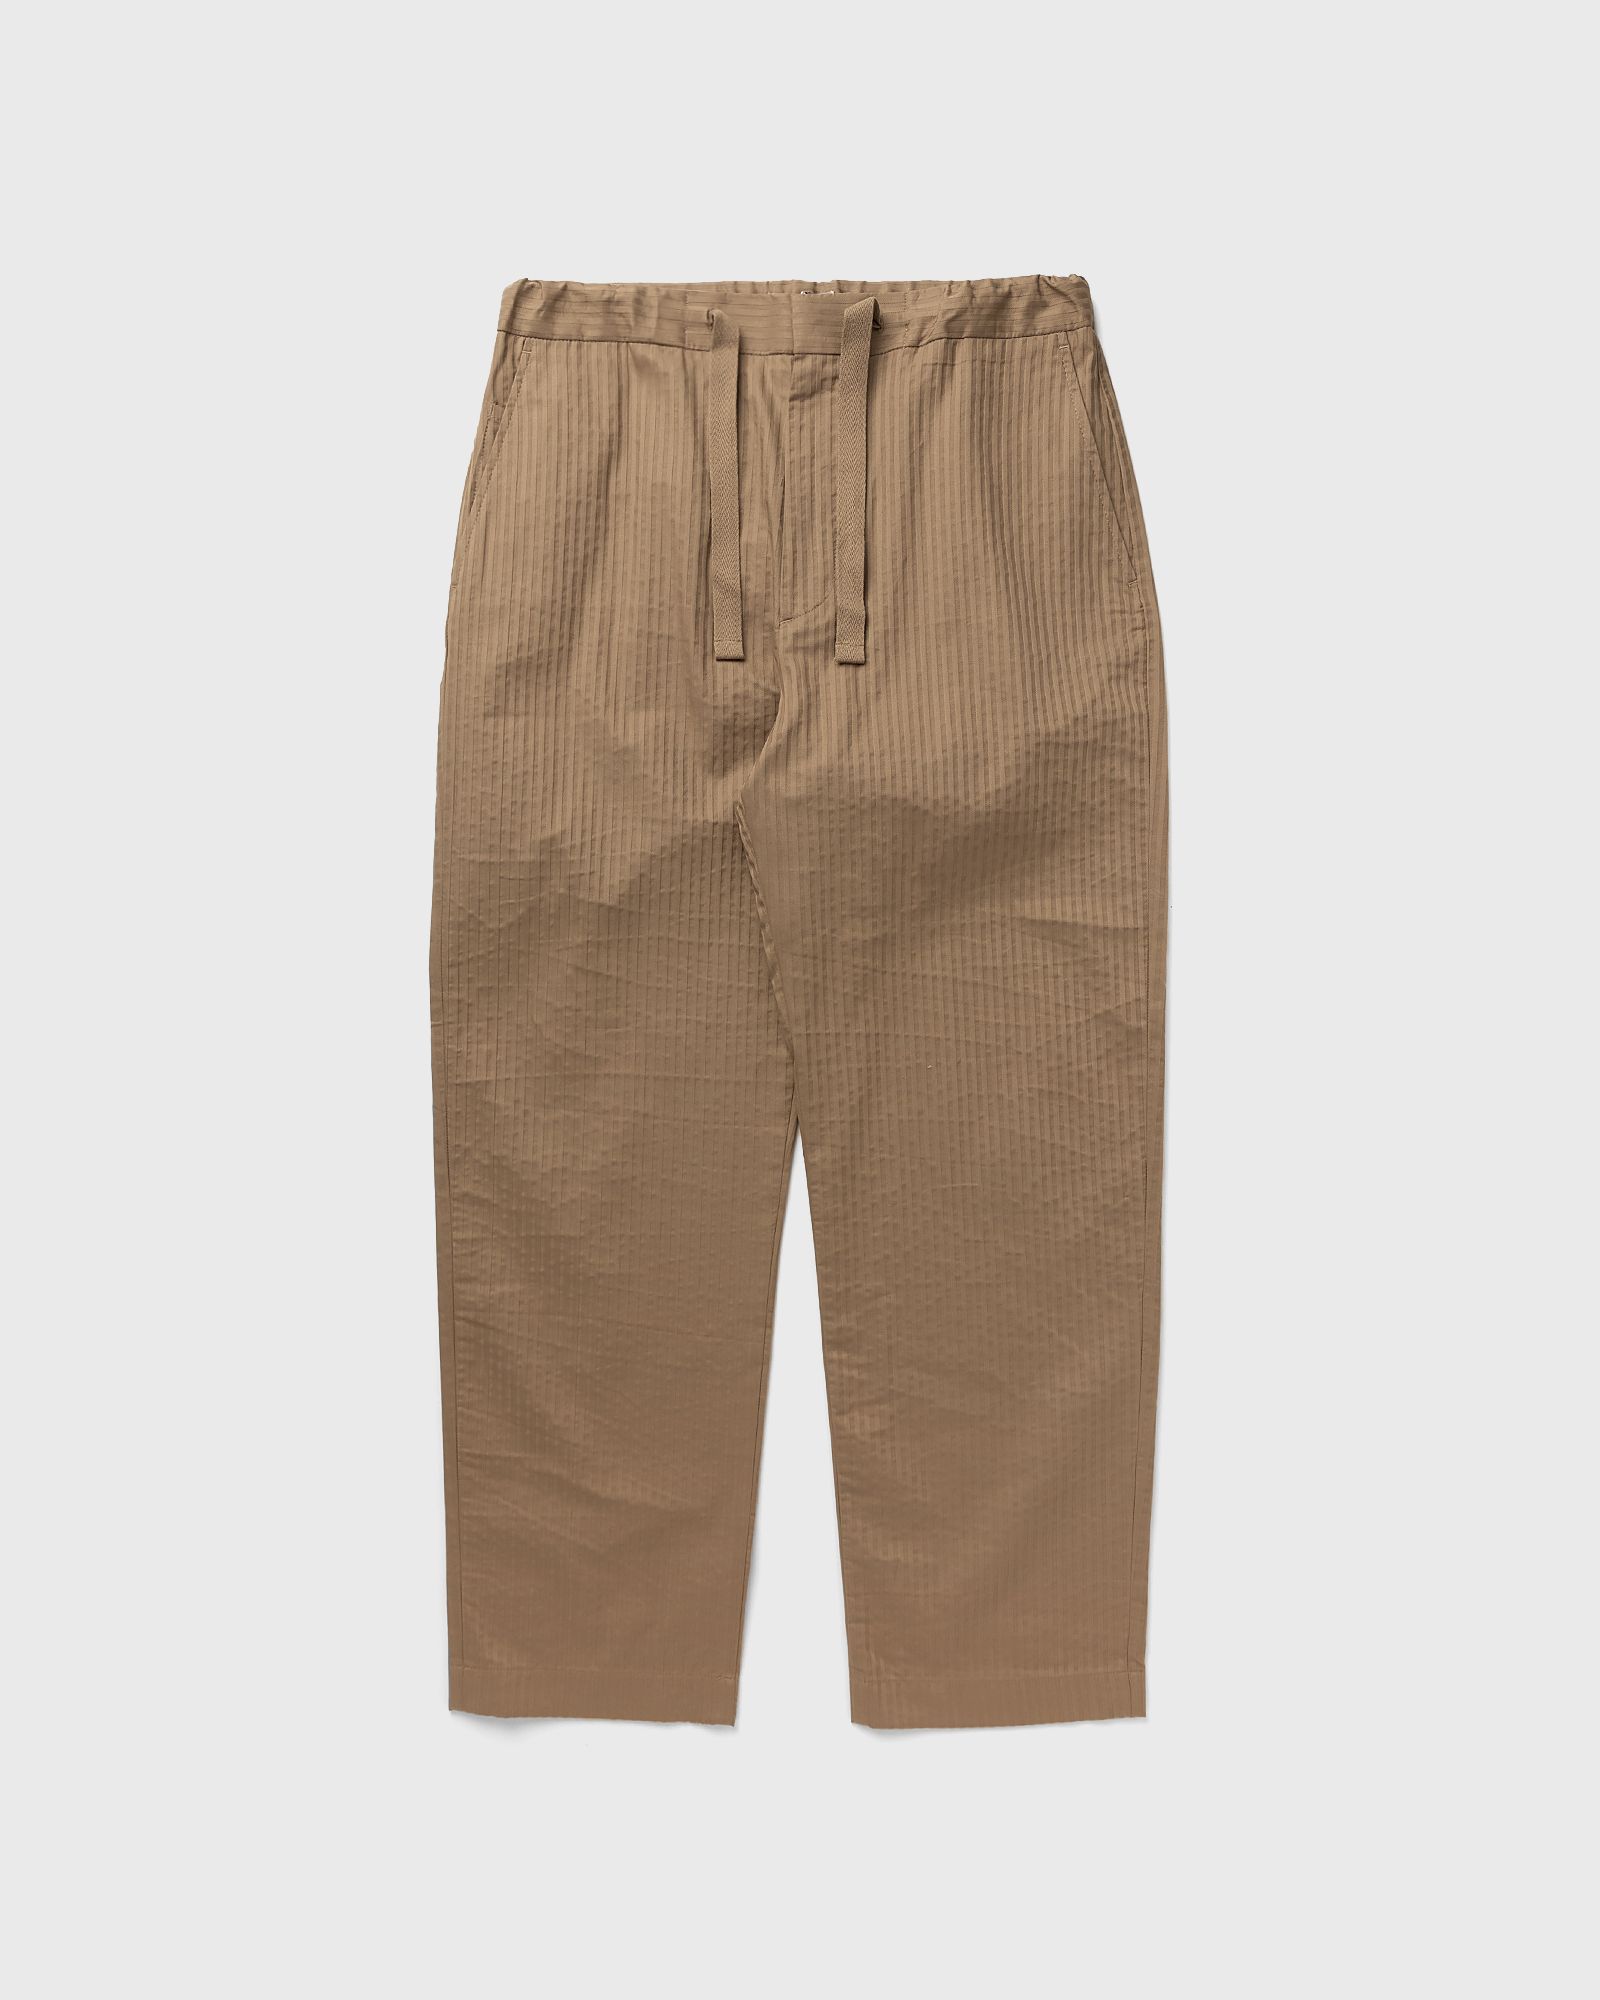 CLOSED - nanaimo straight men casual pants beige in größe:l